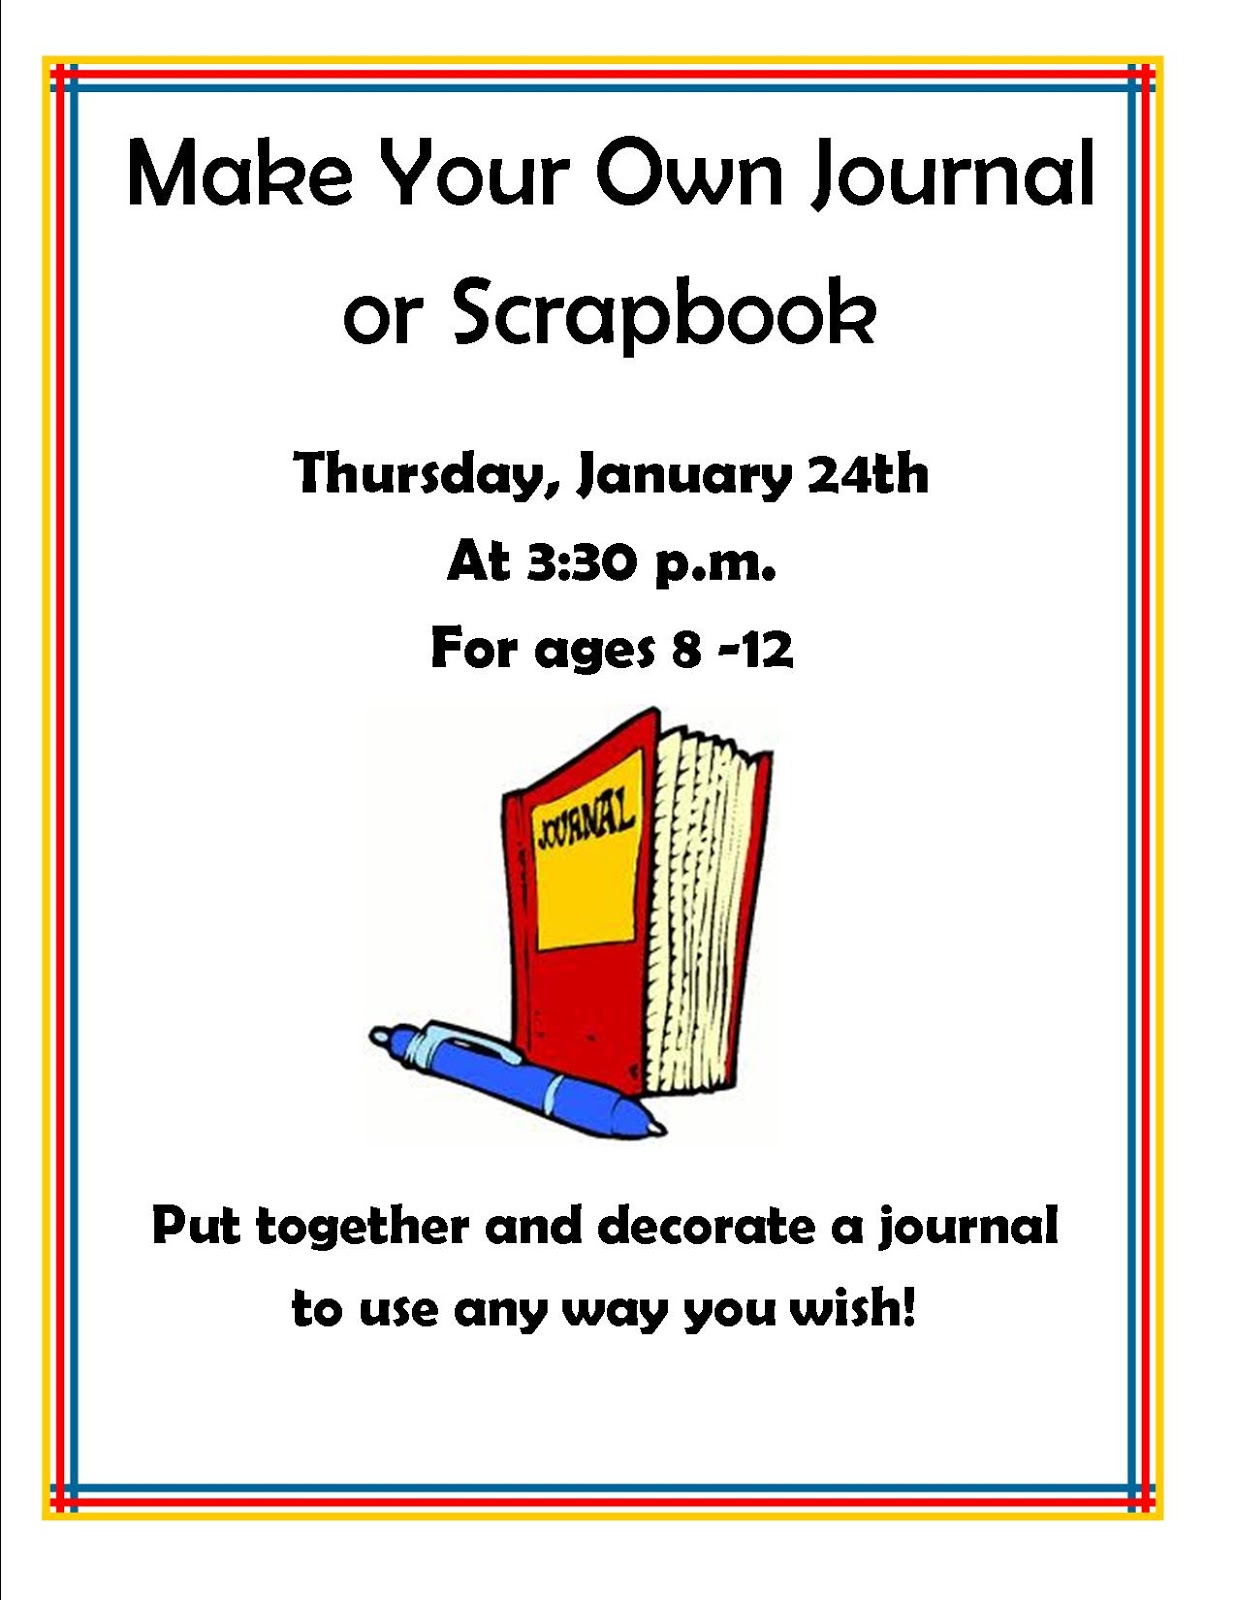 Franklin Public Library: Make Your Own Journal